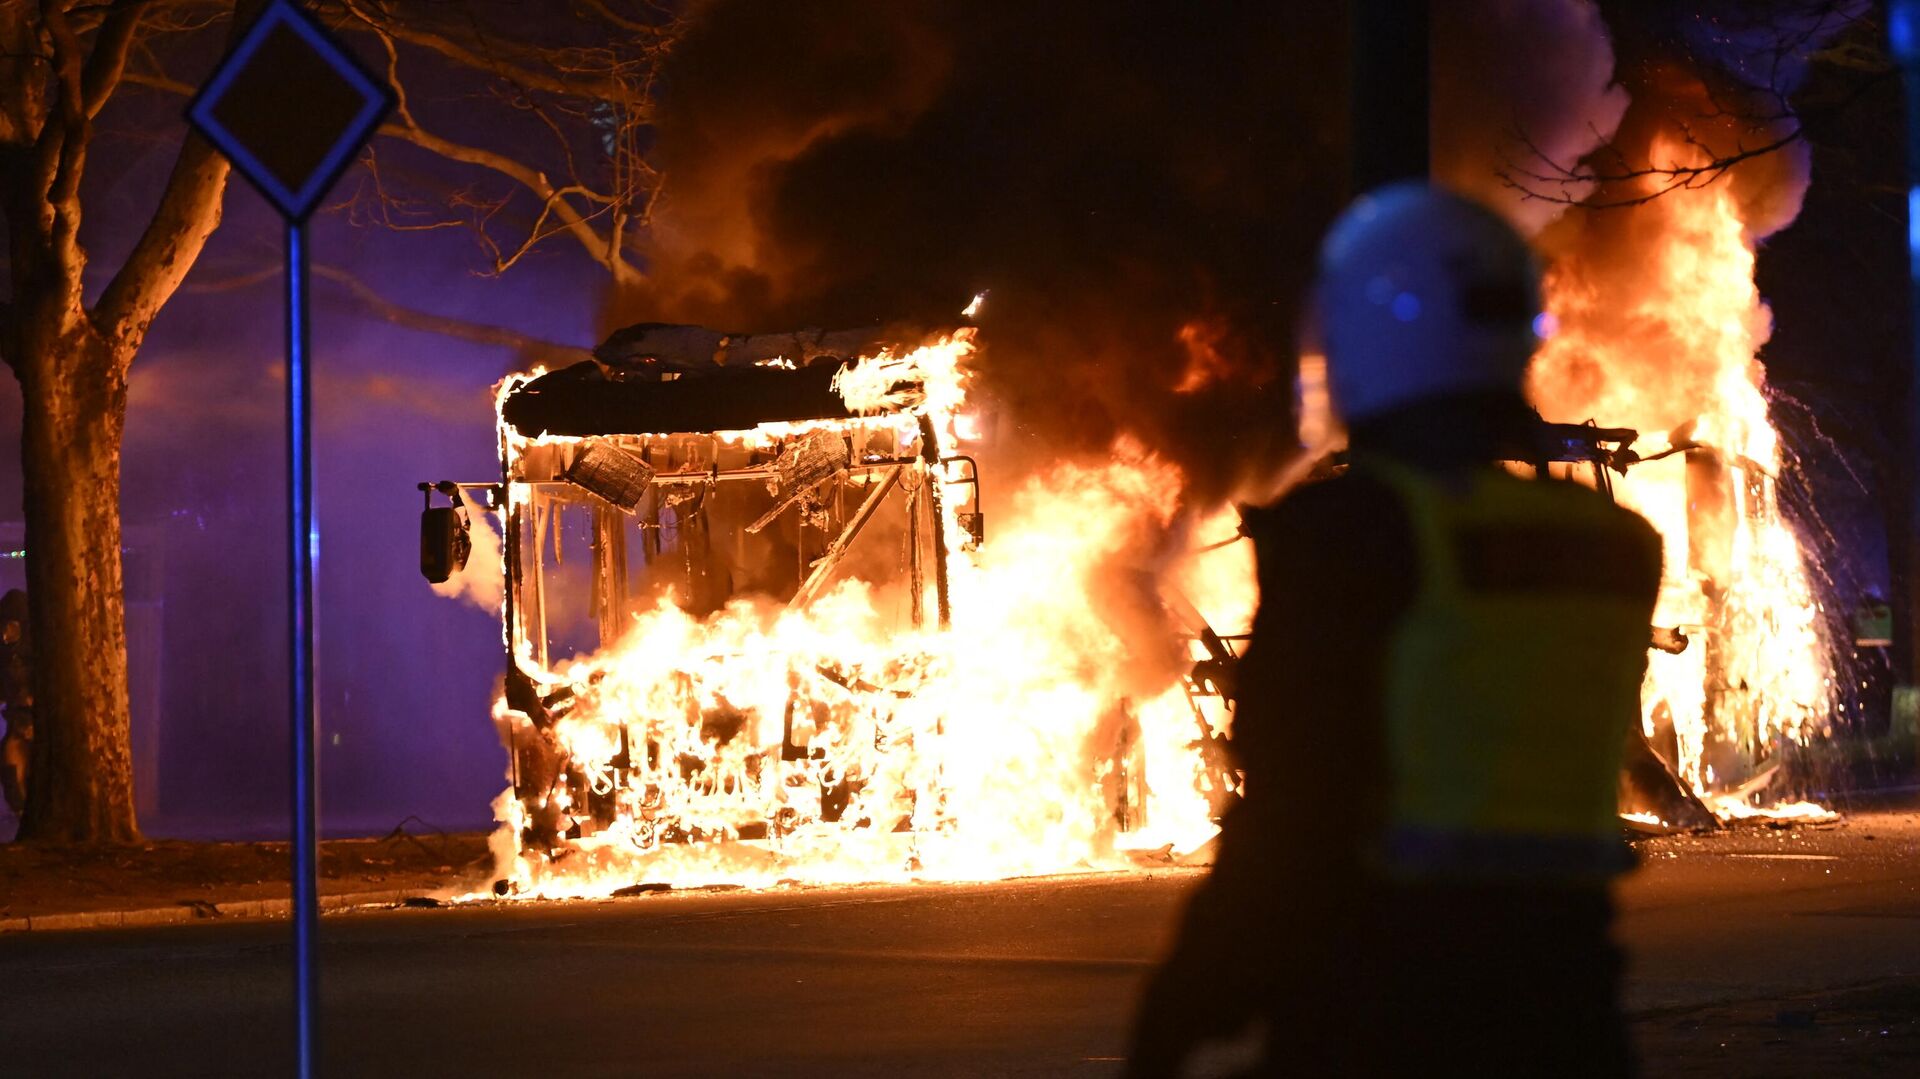 An anti-riot police officer stands next to a city bus burning in Malmo late April 16, 2022 - Sputnik International, 1920, 22.04.2022